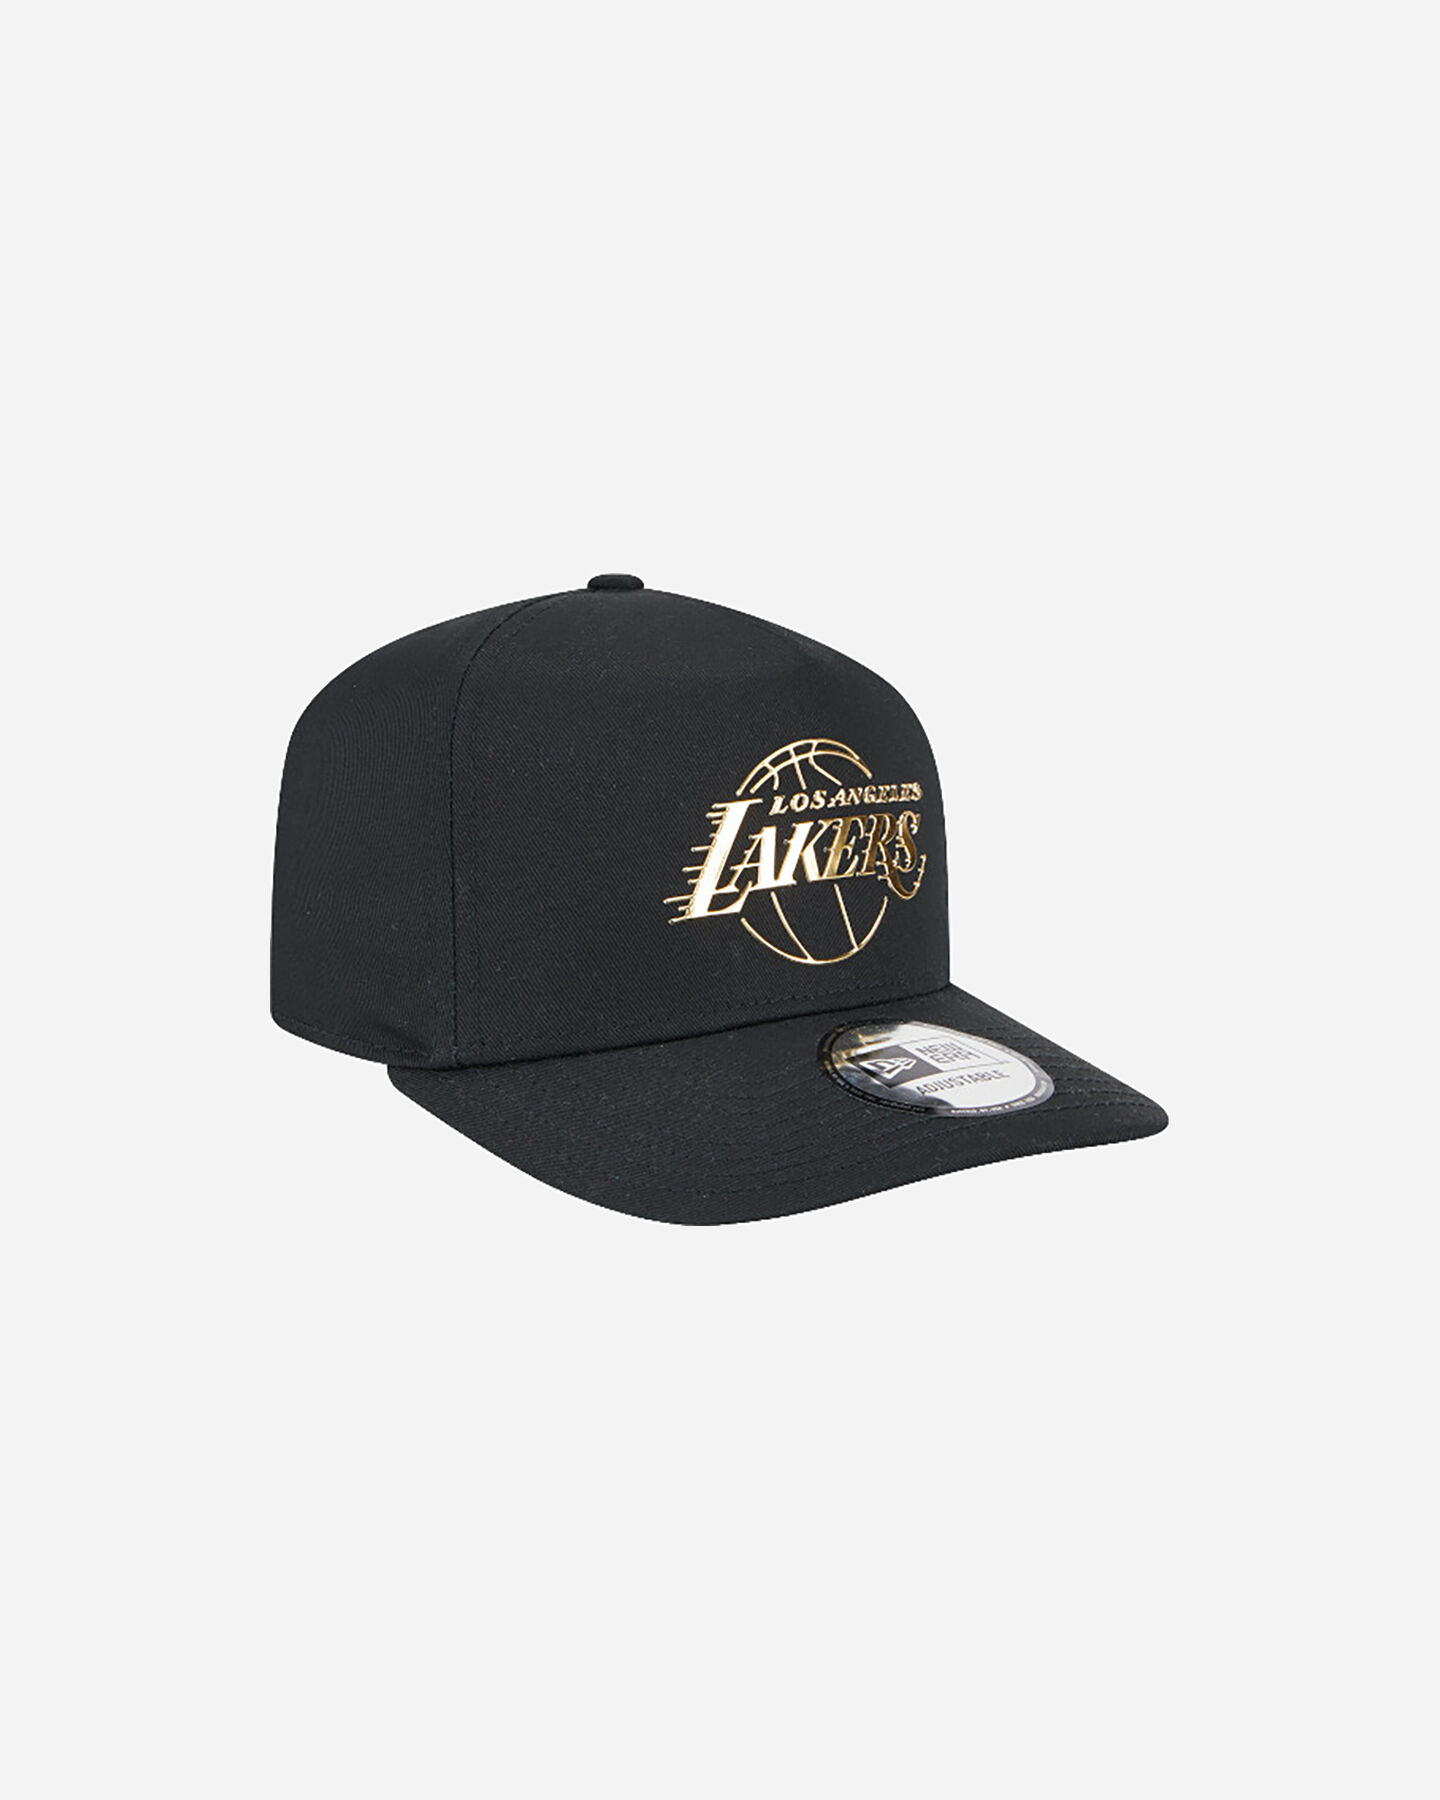  Cappellino NEW ERA 9FORTY EFRAME FOIL LOS ANGELES LAKERS  S5630878|001|OSFM scatto 2